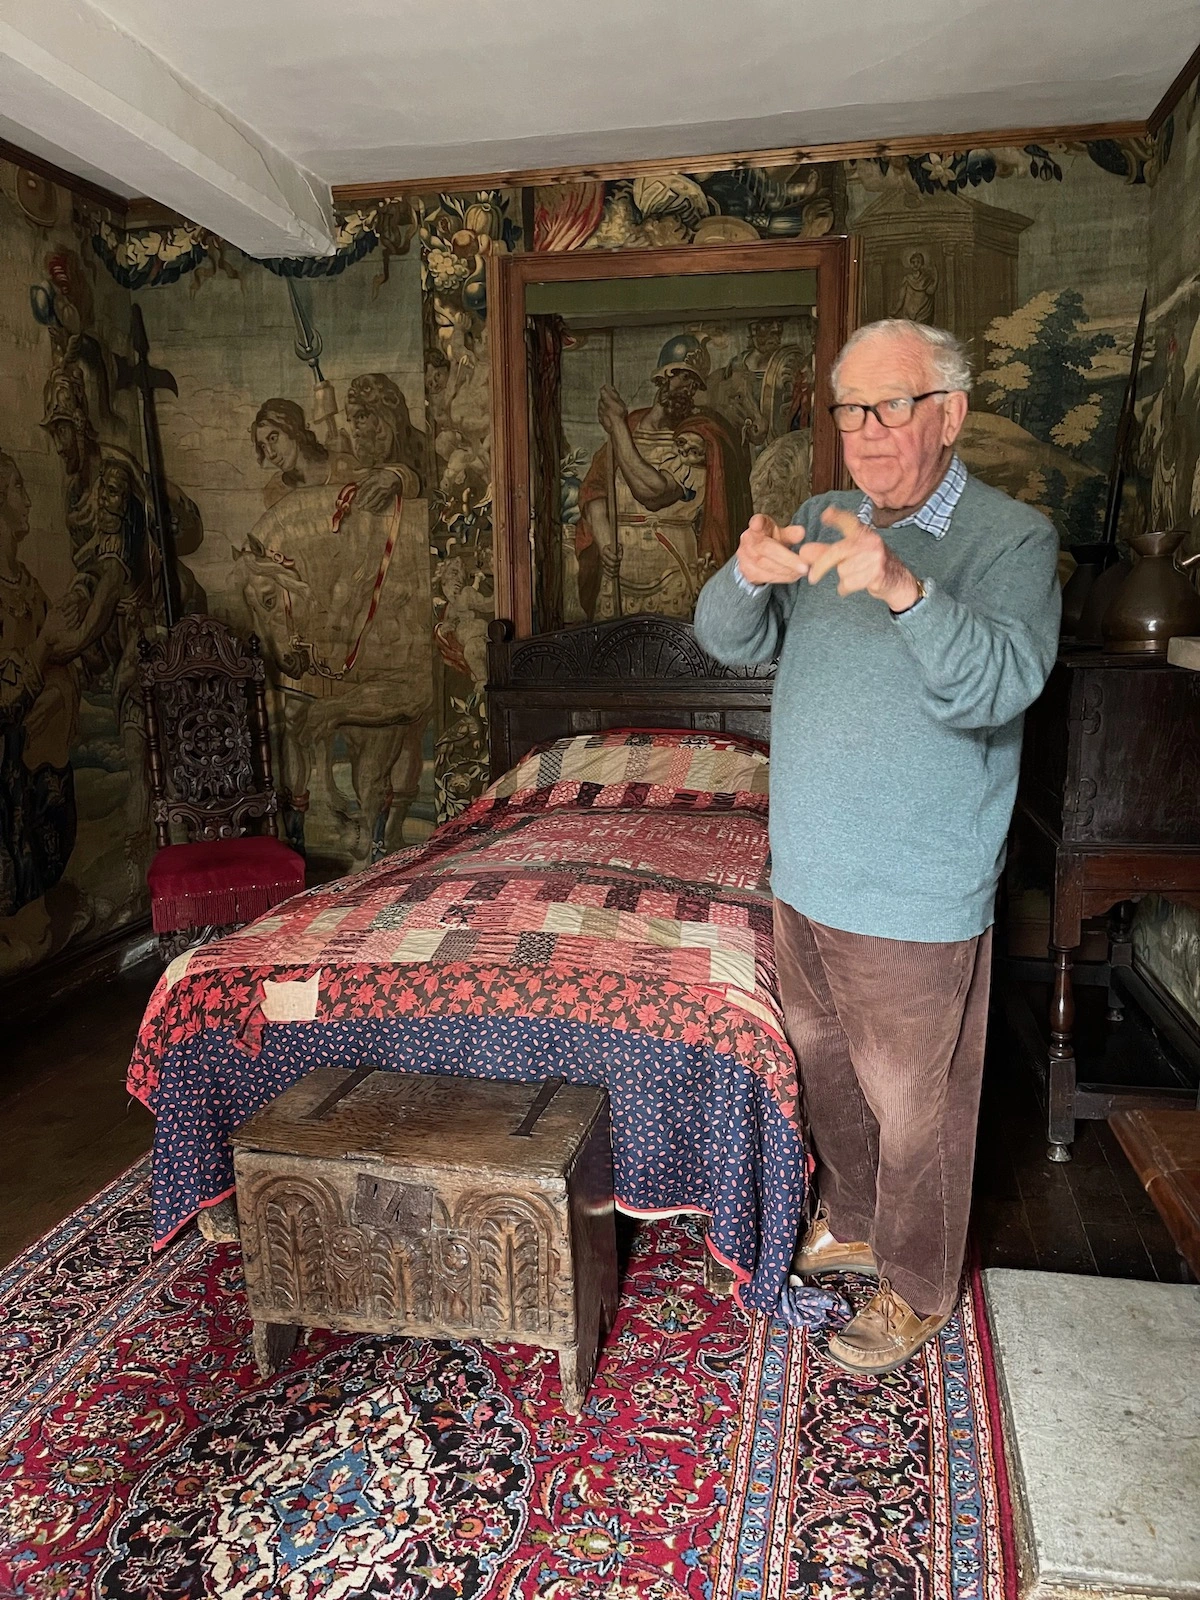 Touring the bedroom where Oliver Cromwell stayed